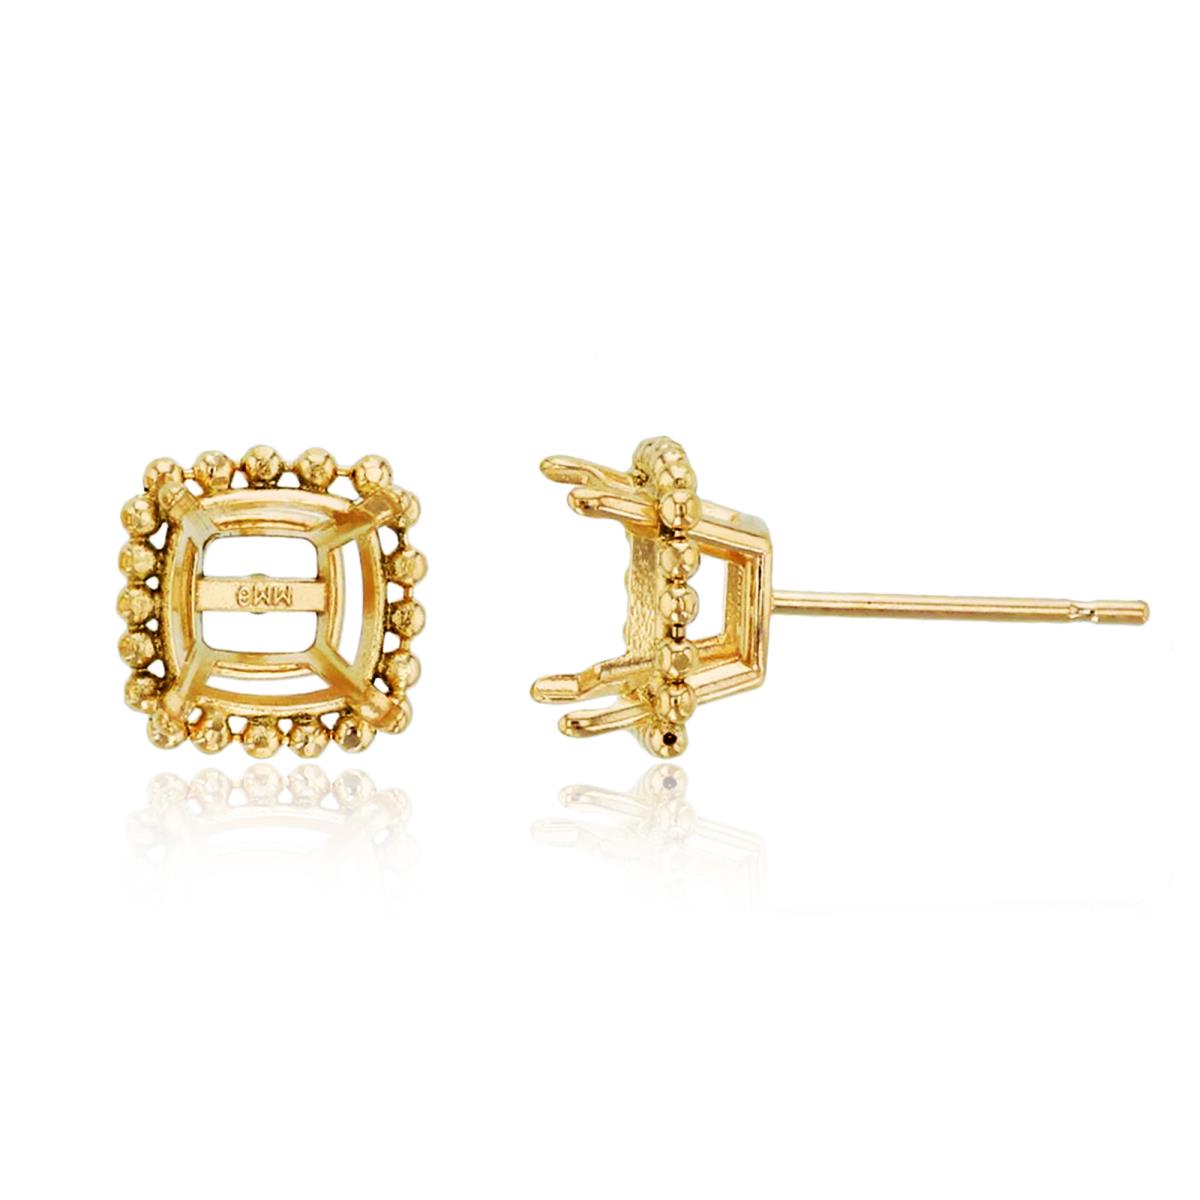 14K Yellow Gold 6x6mm Cushion 4-Prong Basket with Bead Frame Stud Earring Finding (PR)